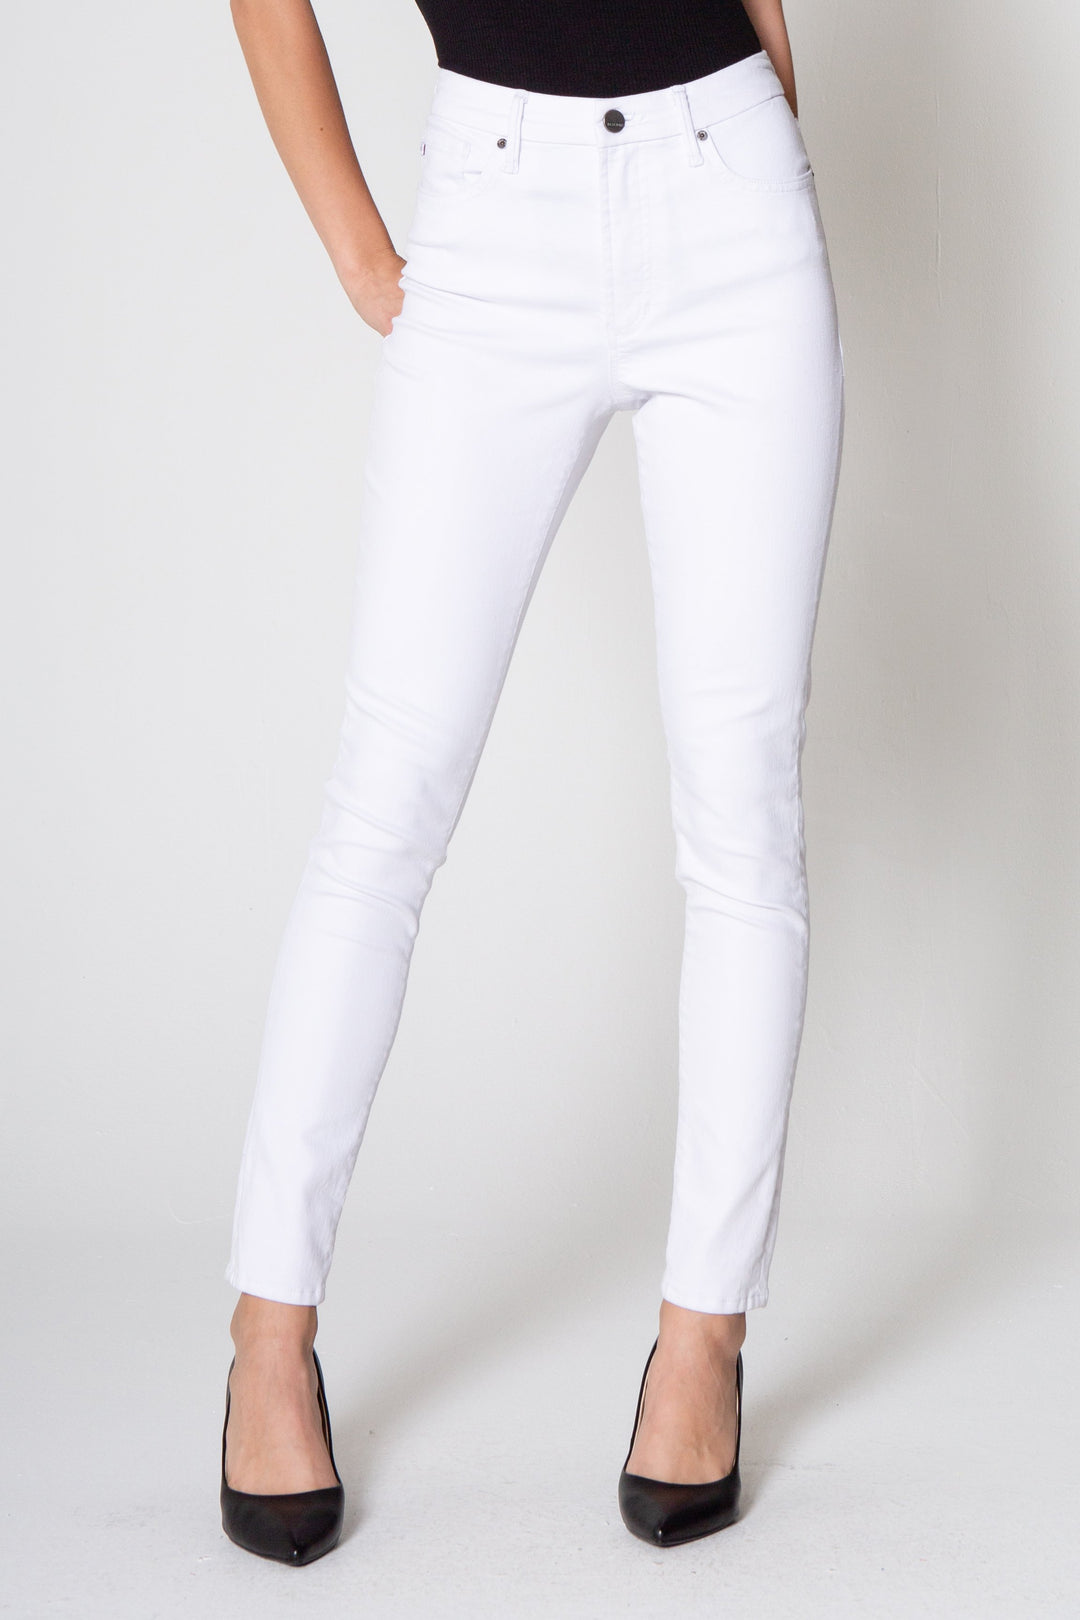 image of a female model wearing a OLIVIA SUPER HIGH RISE SKINNY JEANS OPTIC WHITE JEANS